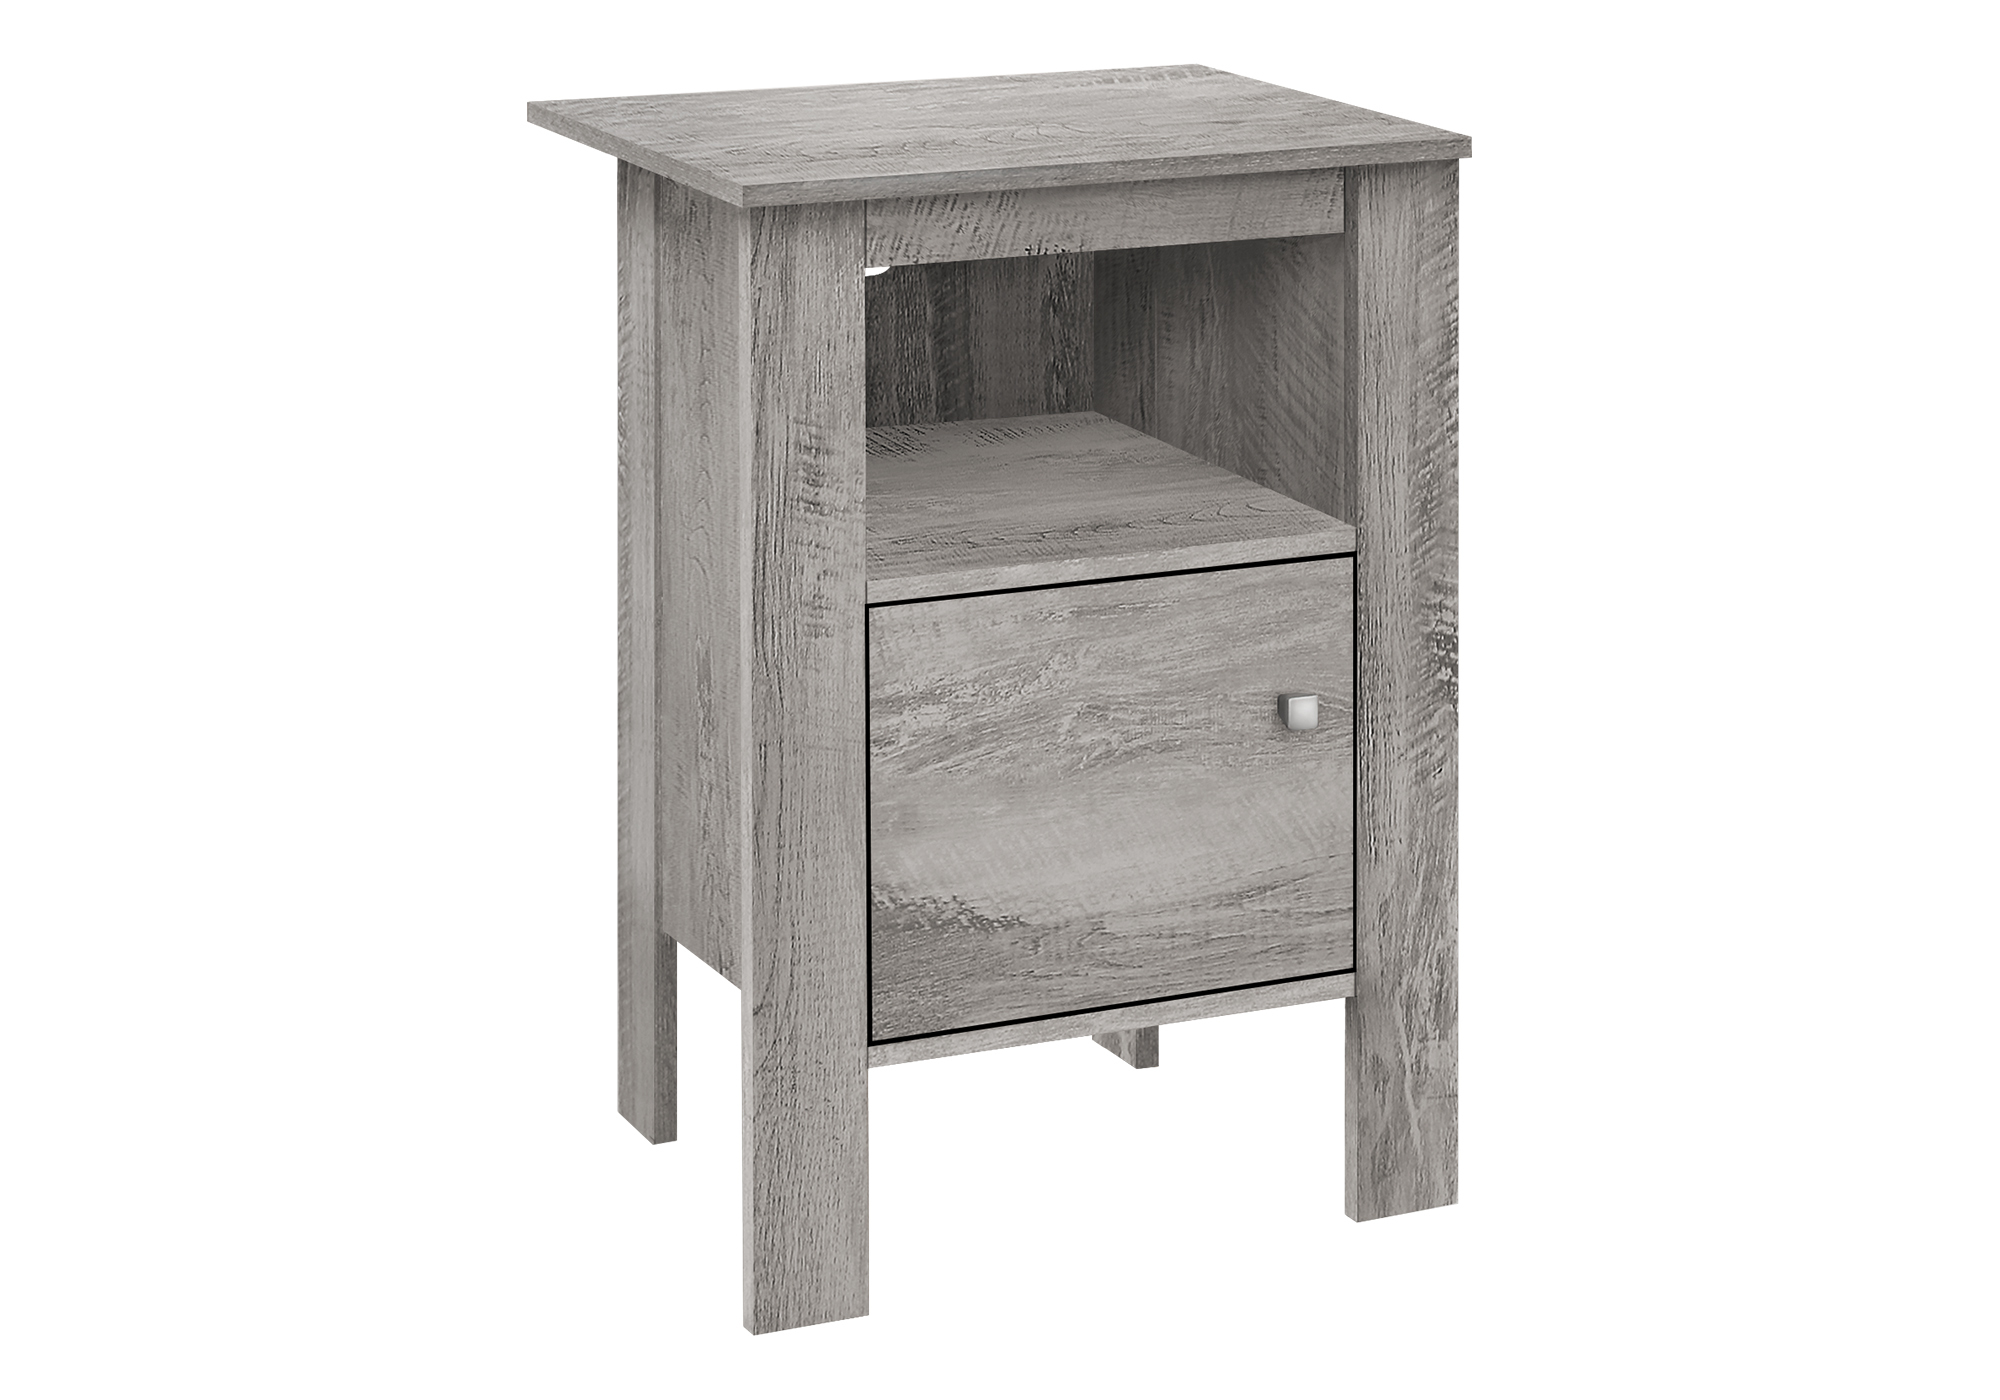 NIGHTSTAND - INDUSTRIAL GREY NIGHT STAND WITH STORAGE